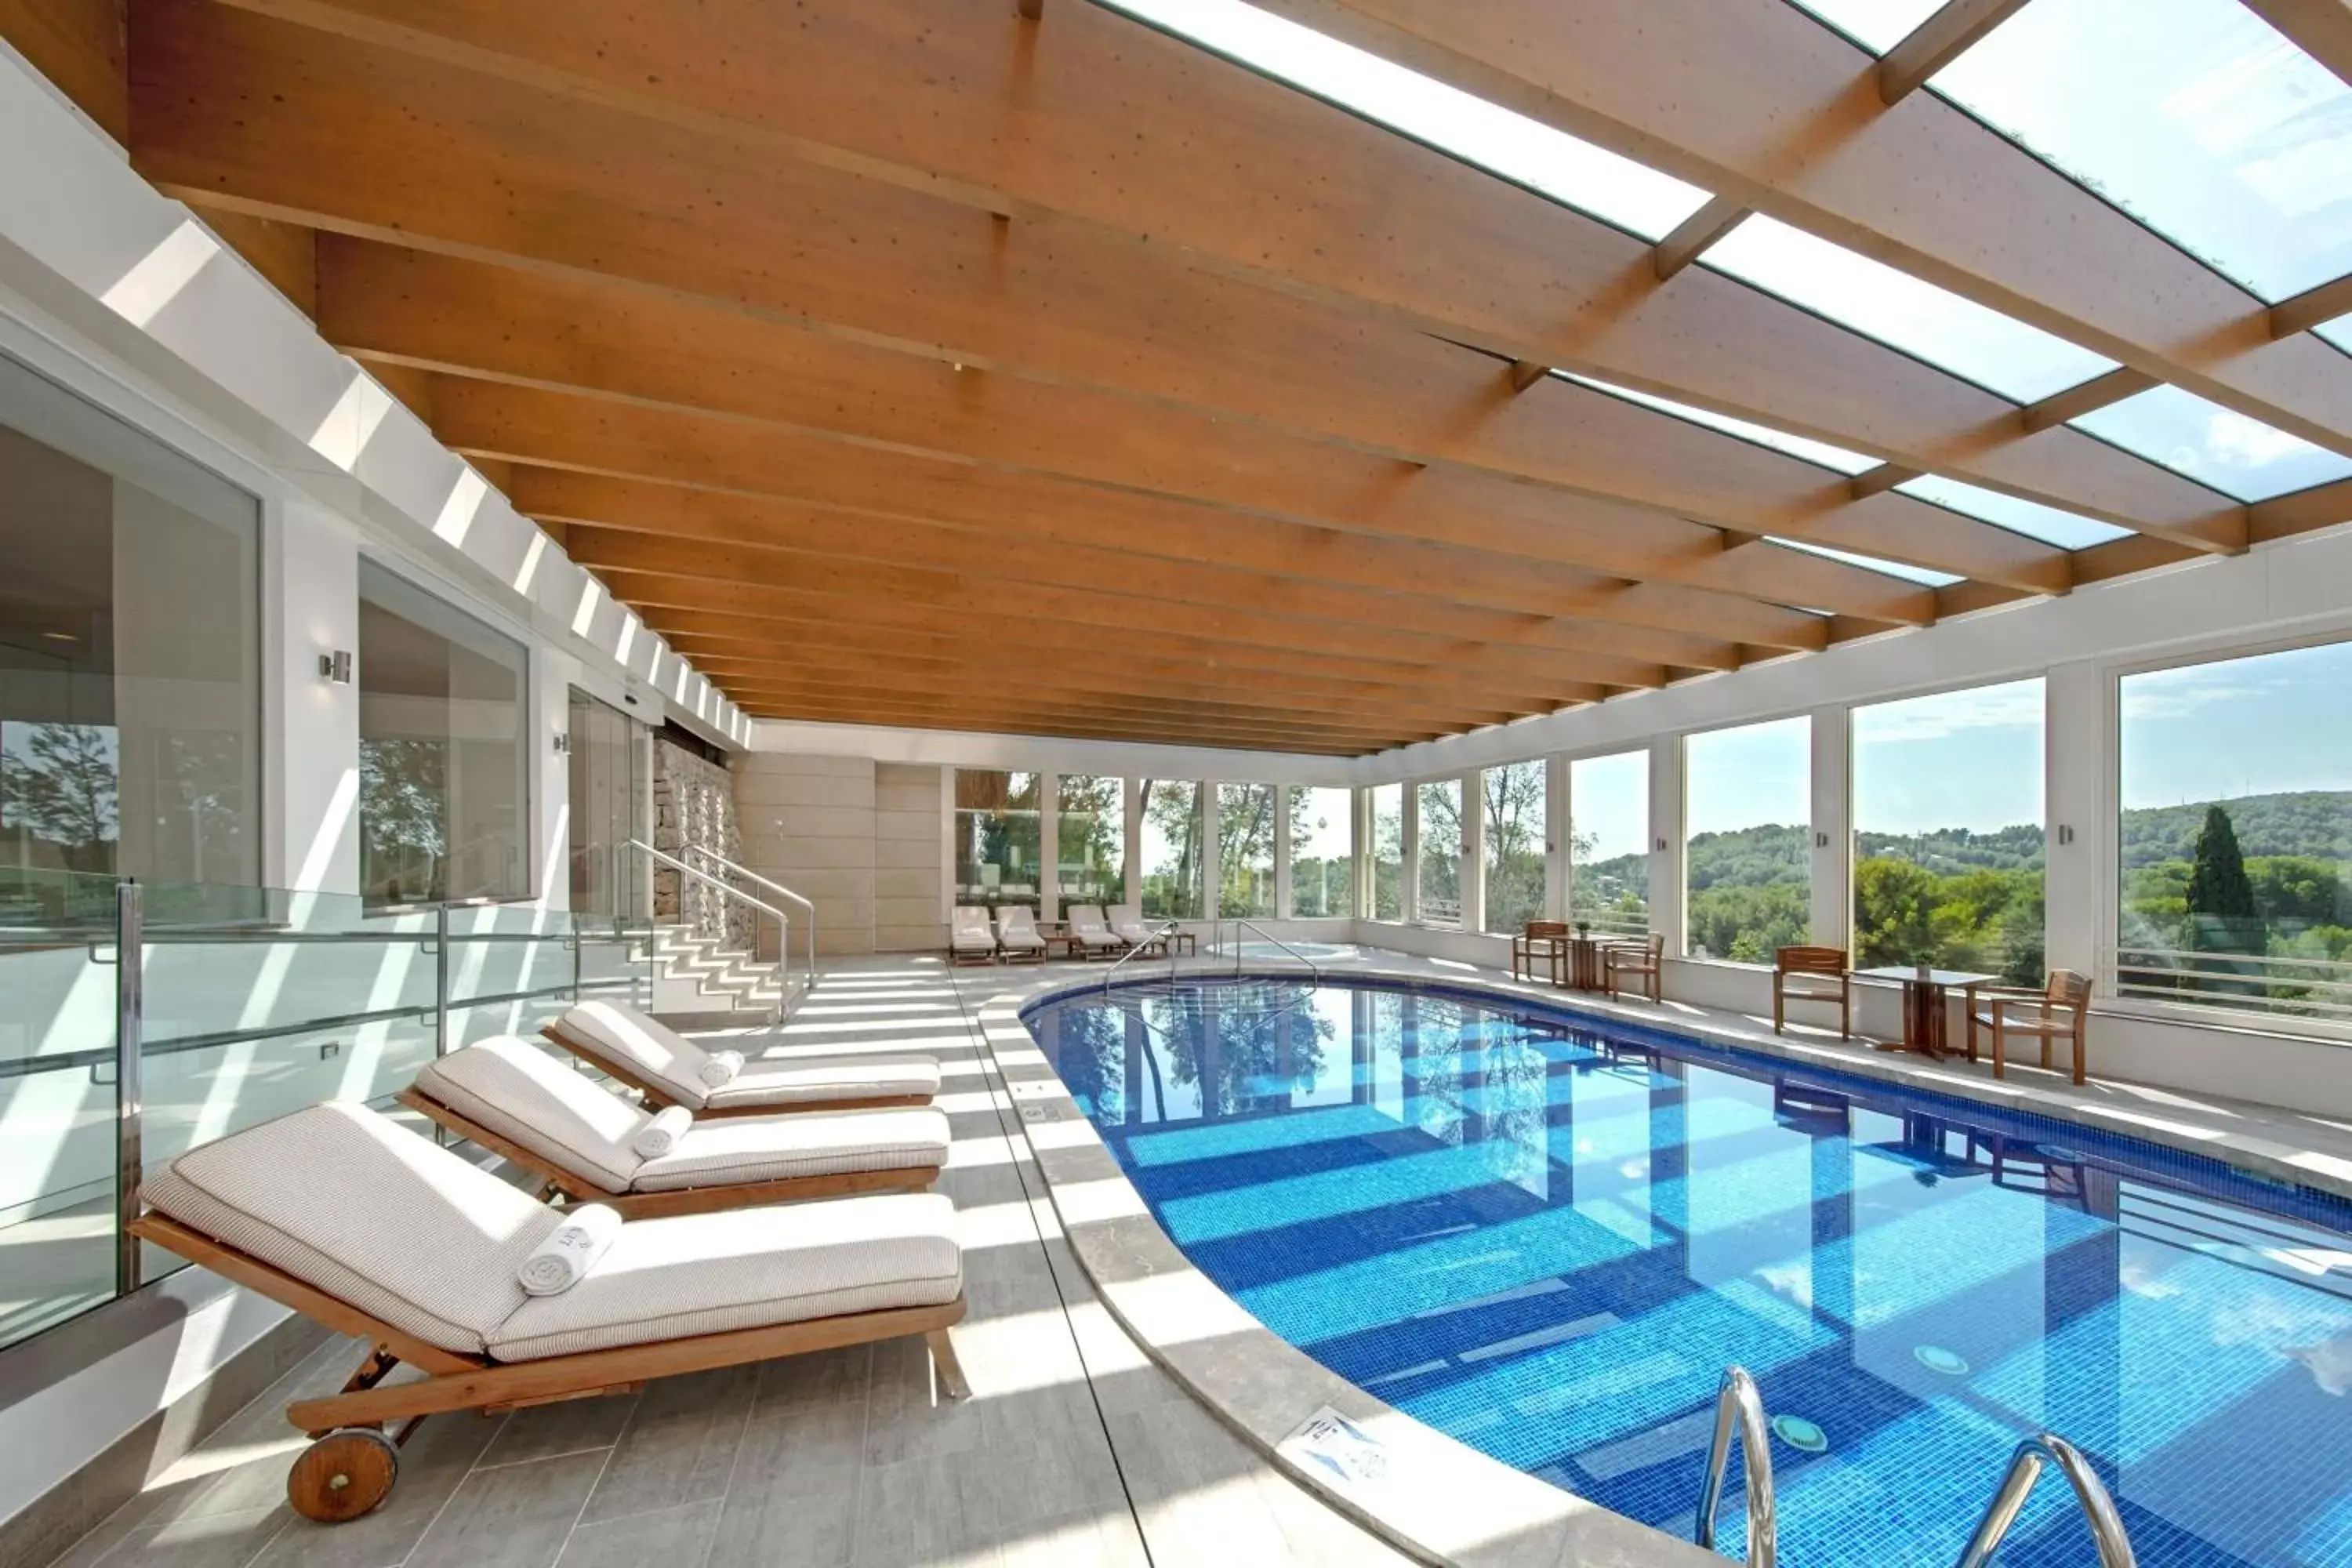 Swimming Pool in Castillo Hotel Son Vida, a Luxury Collection Hotel, Mallorca - Adults Only